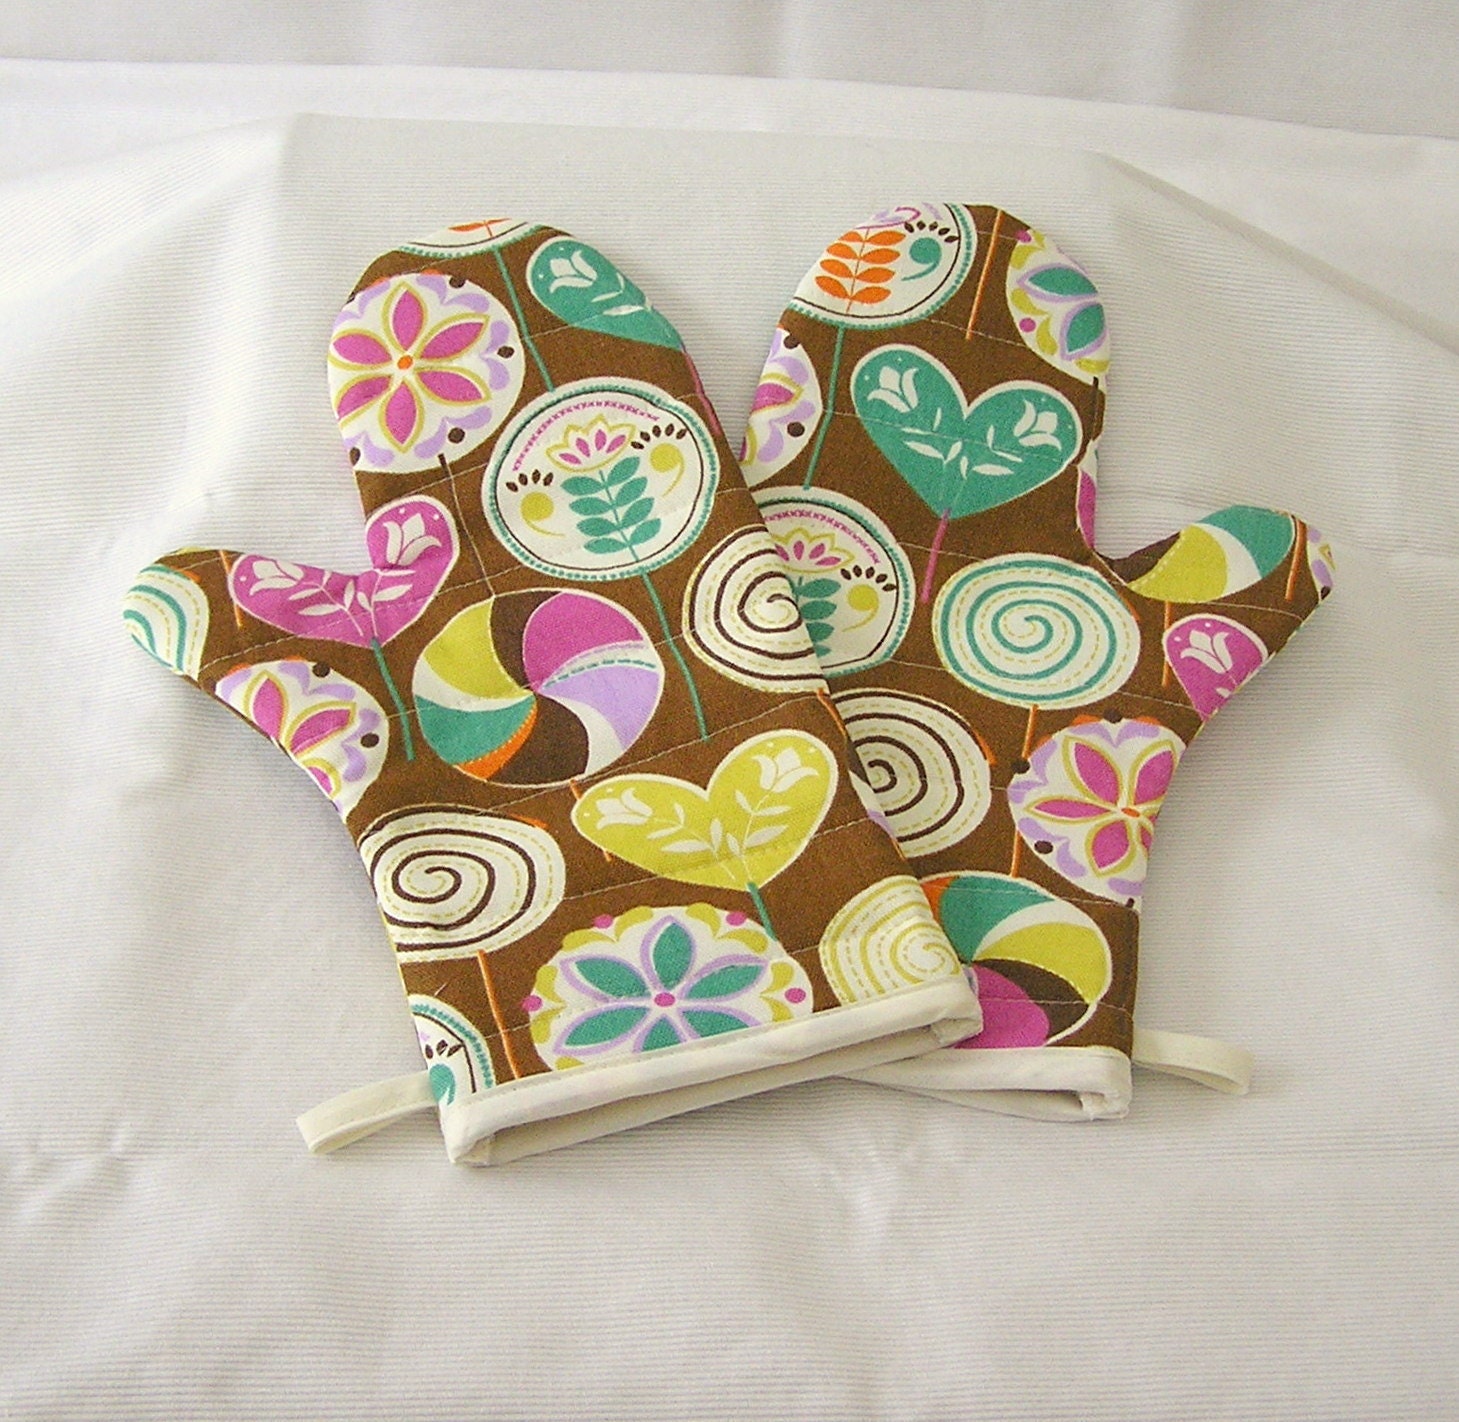 Oven Mitts Quilted Handmade One Pair Brightly Colored Candyland Design Fabric